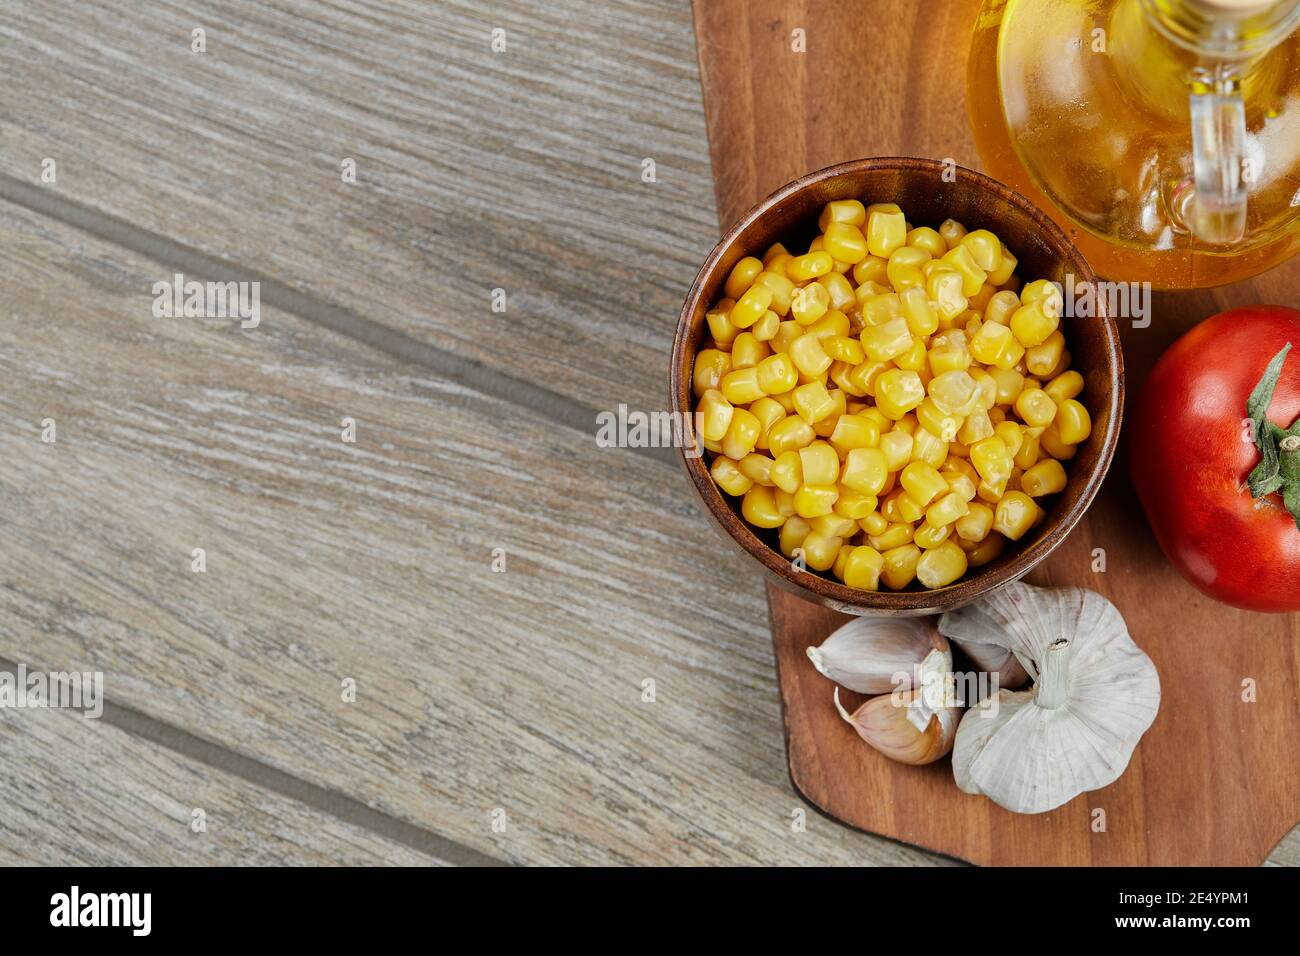 A bowl of boiled sweet corn, oil, and vegetables on a wooden board Stock Photo